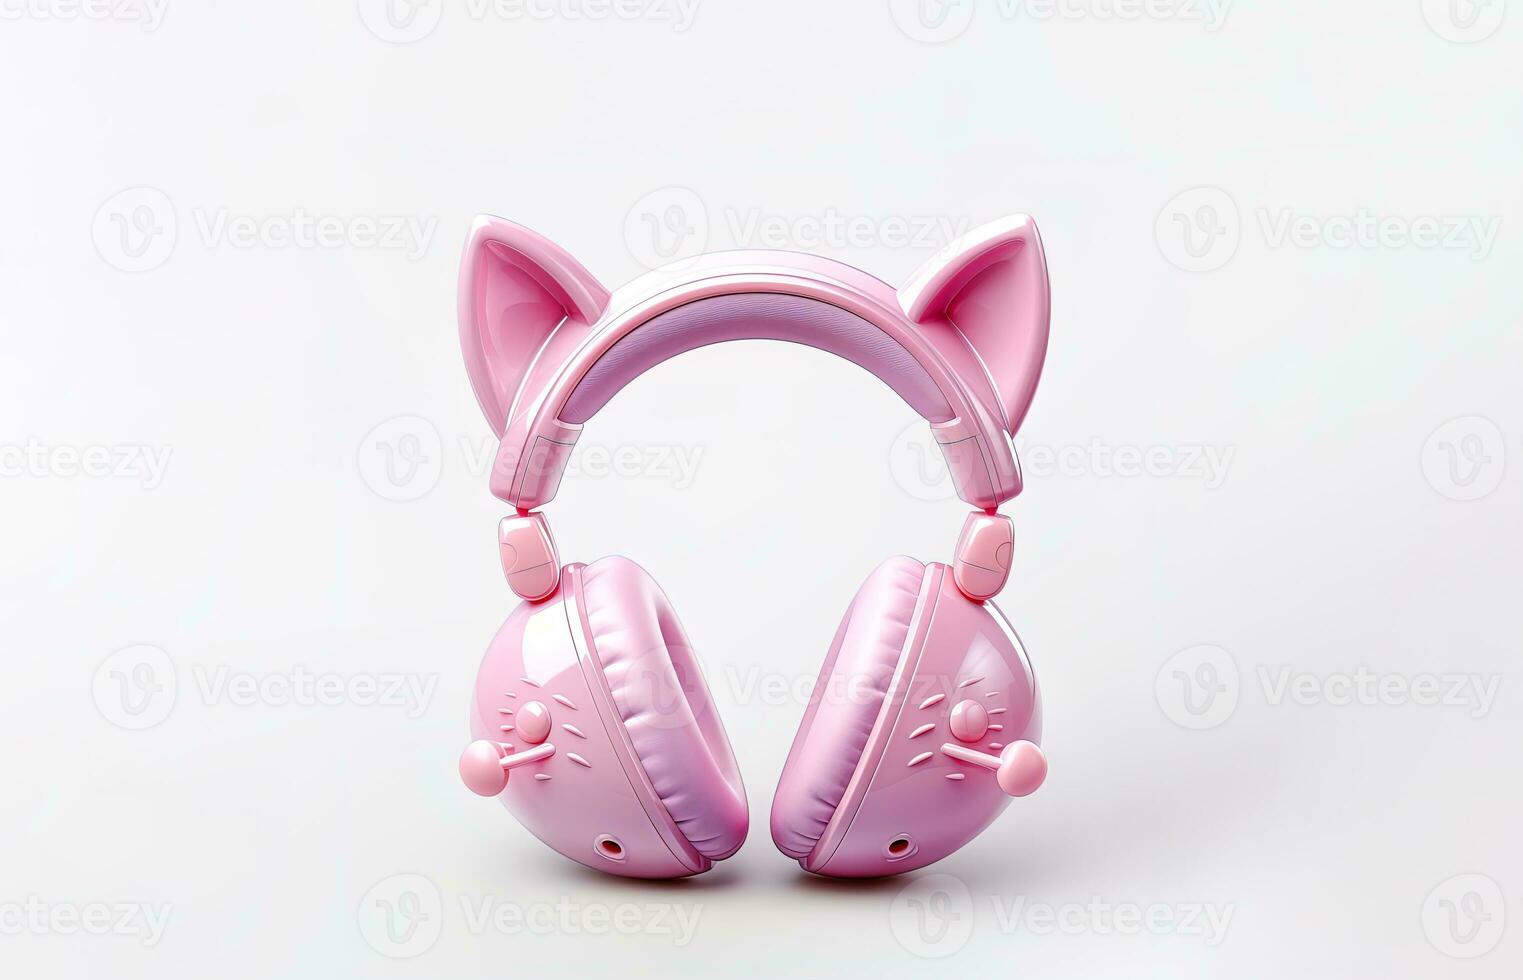 Cute pink headphones with neko ears isolated on white background photo